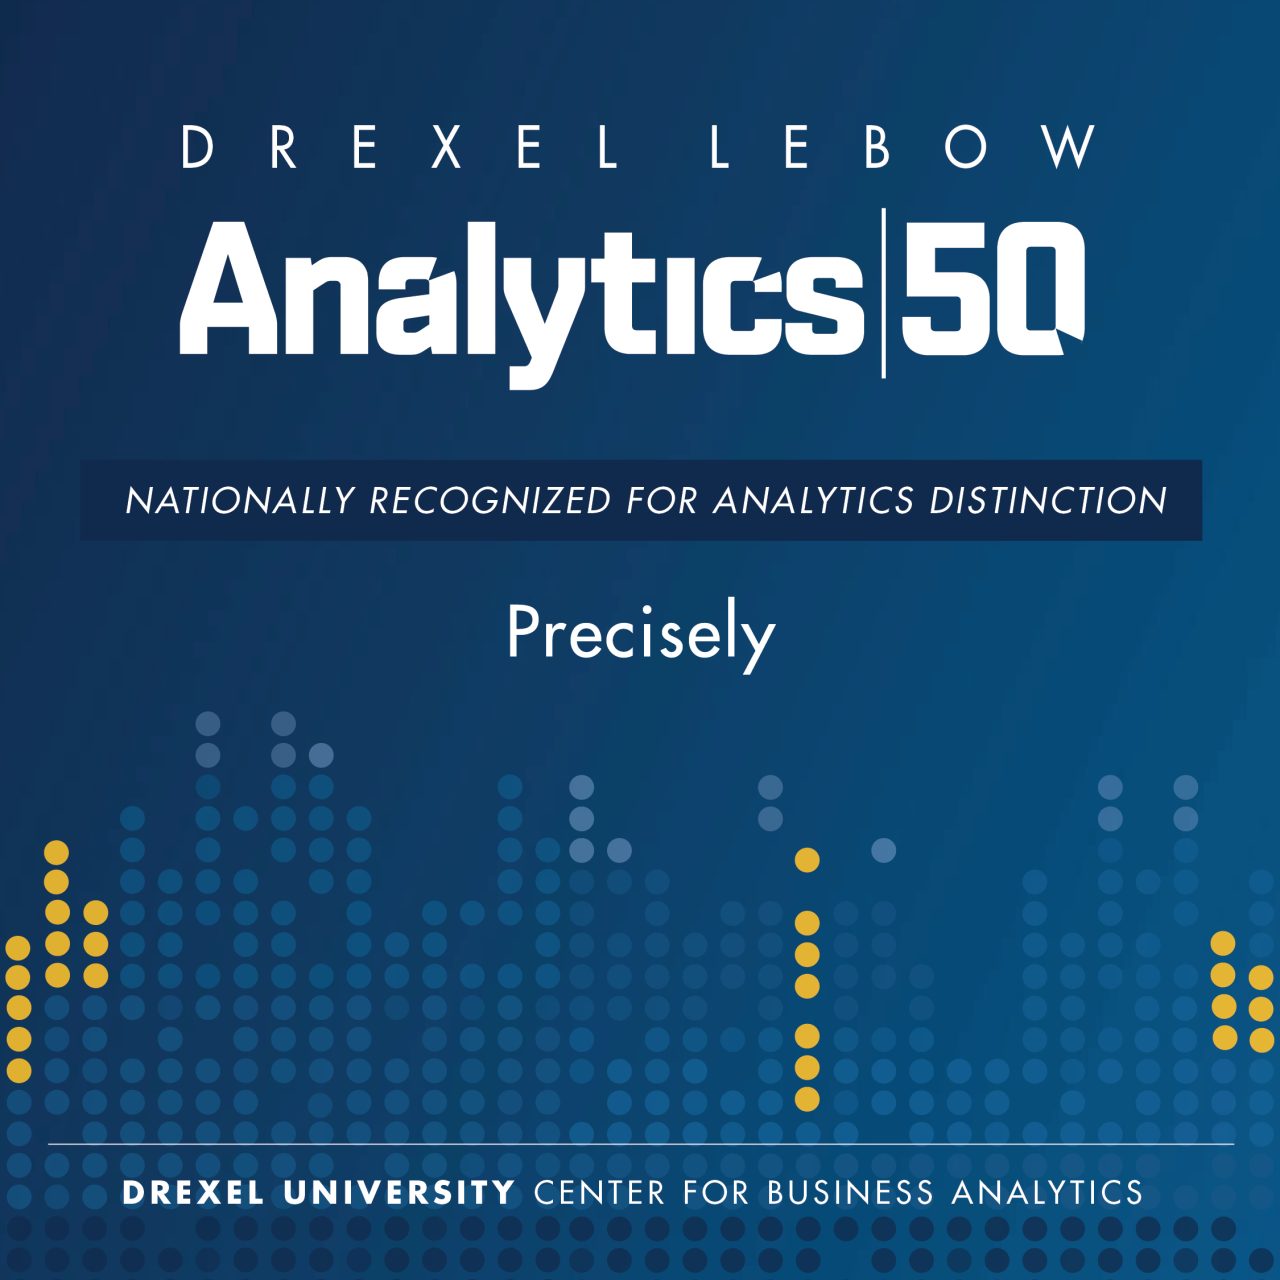 Drexel LeBow Analytics 50 - Nationally Recognized for Analytics Distinction - Precisely 